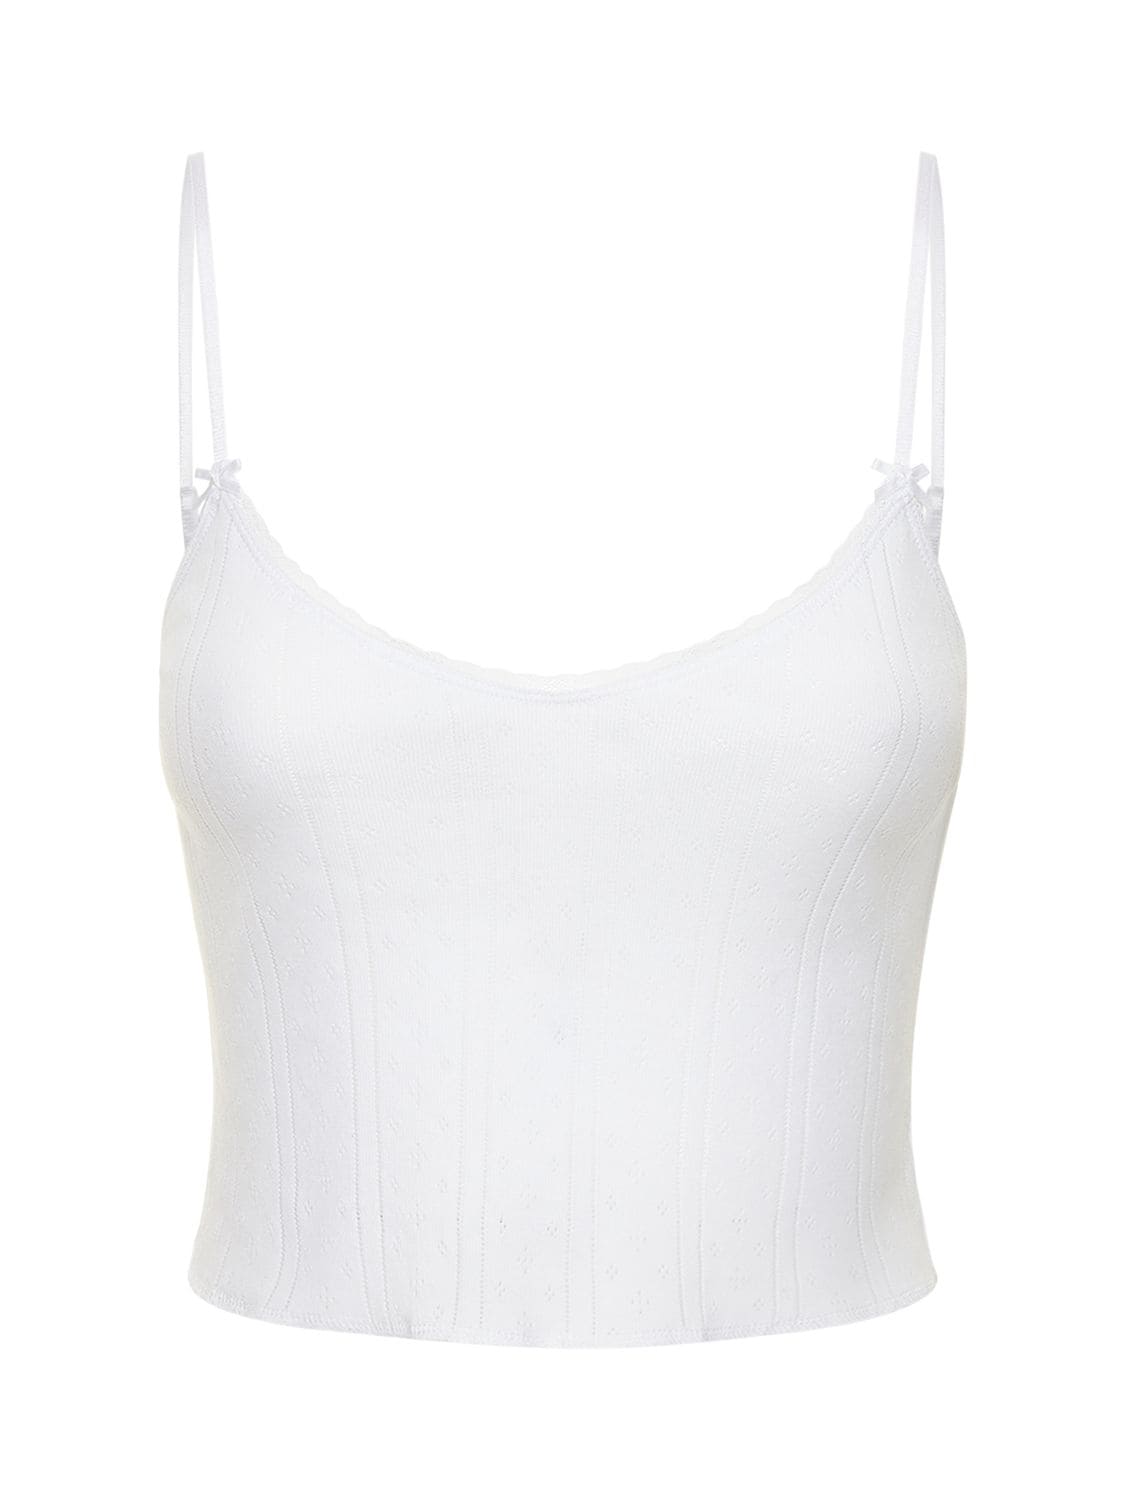 Image of Cotton Pointelle Camisole Top